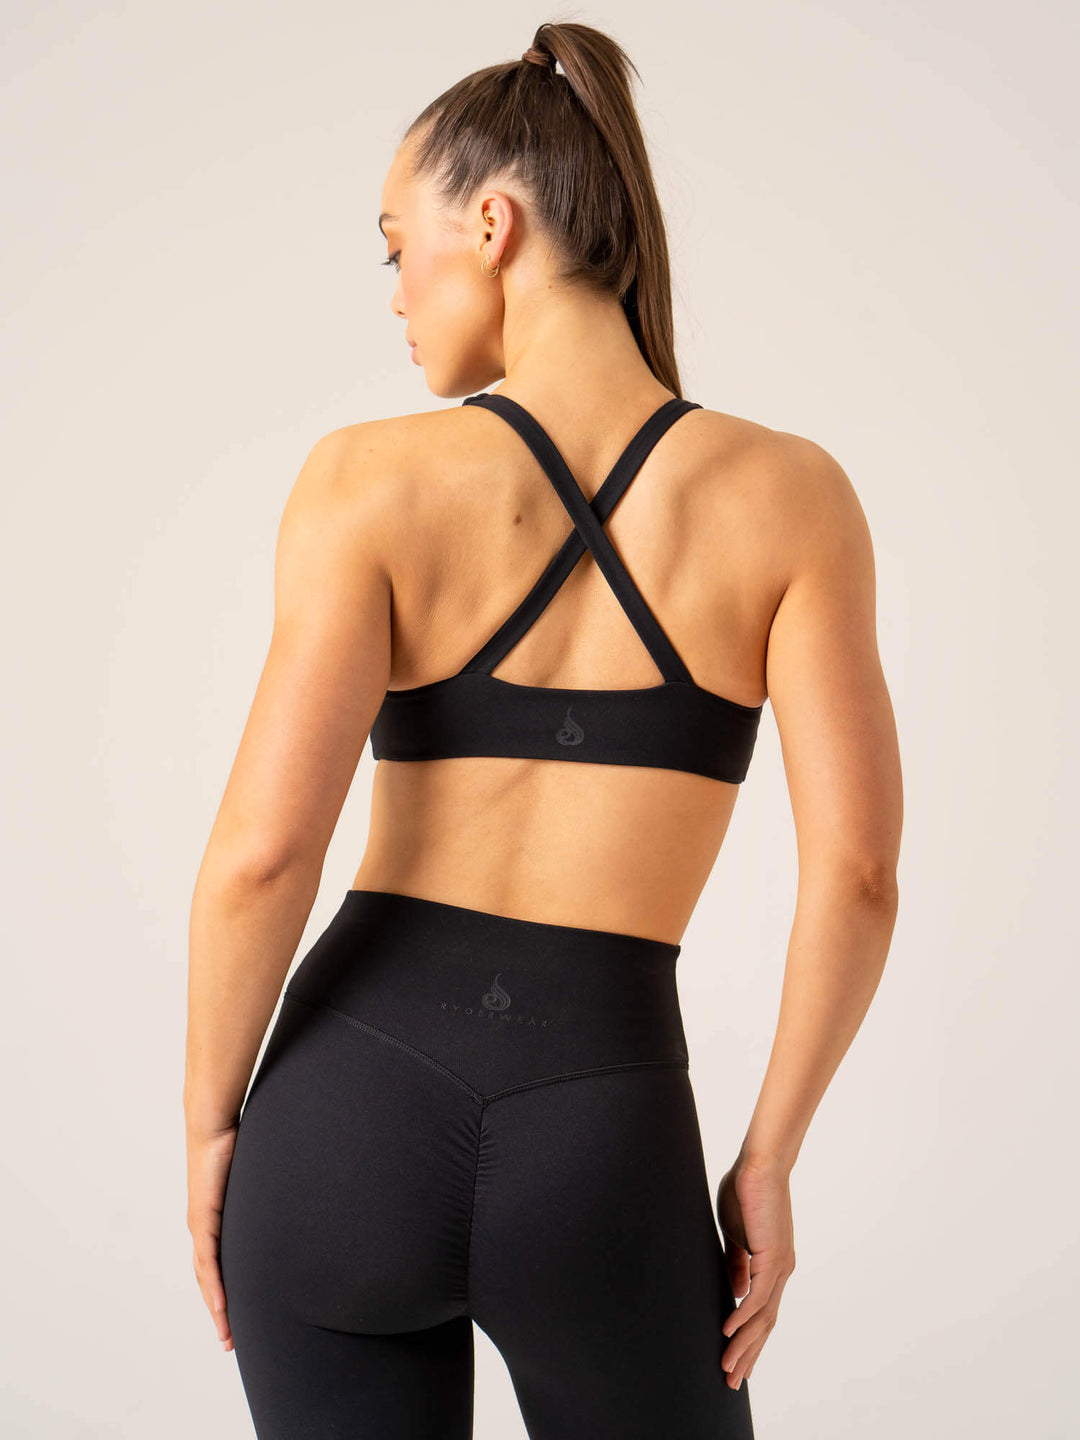 Exercise Outfits - Sports Bras And Sports Leggings